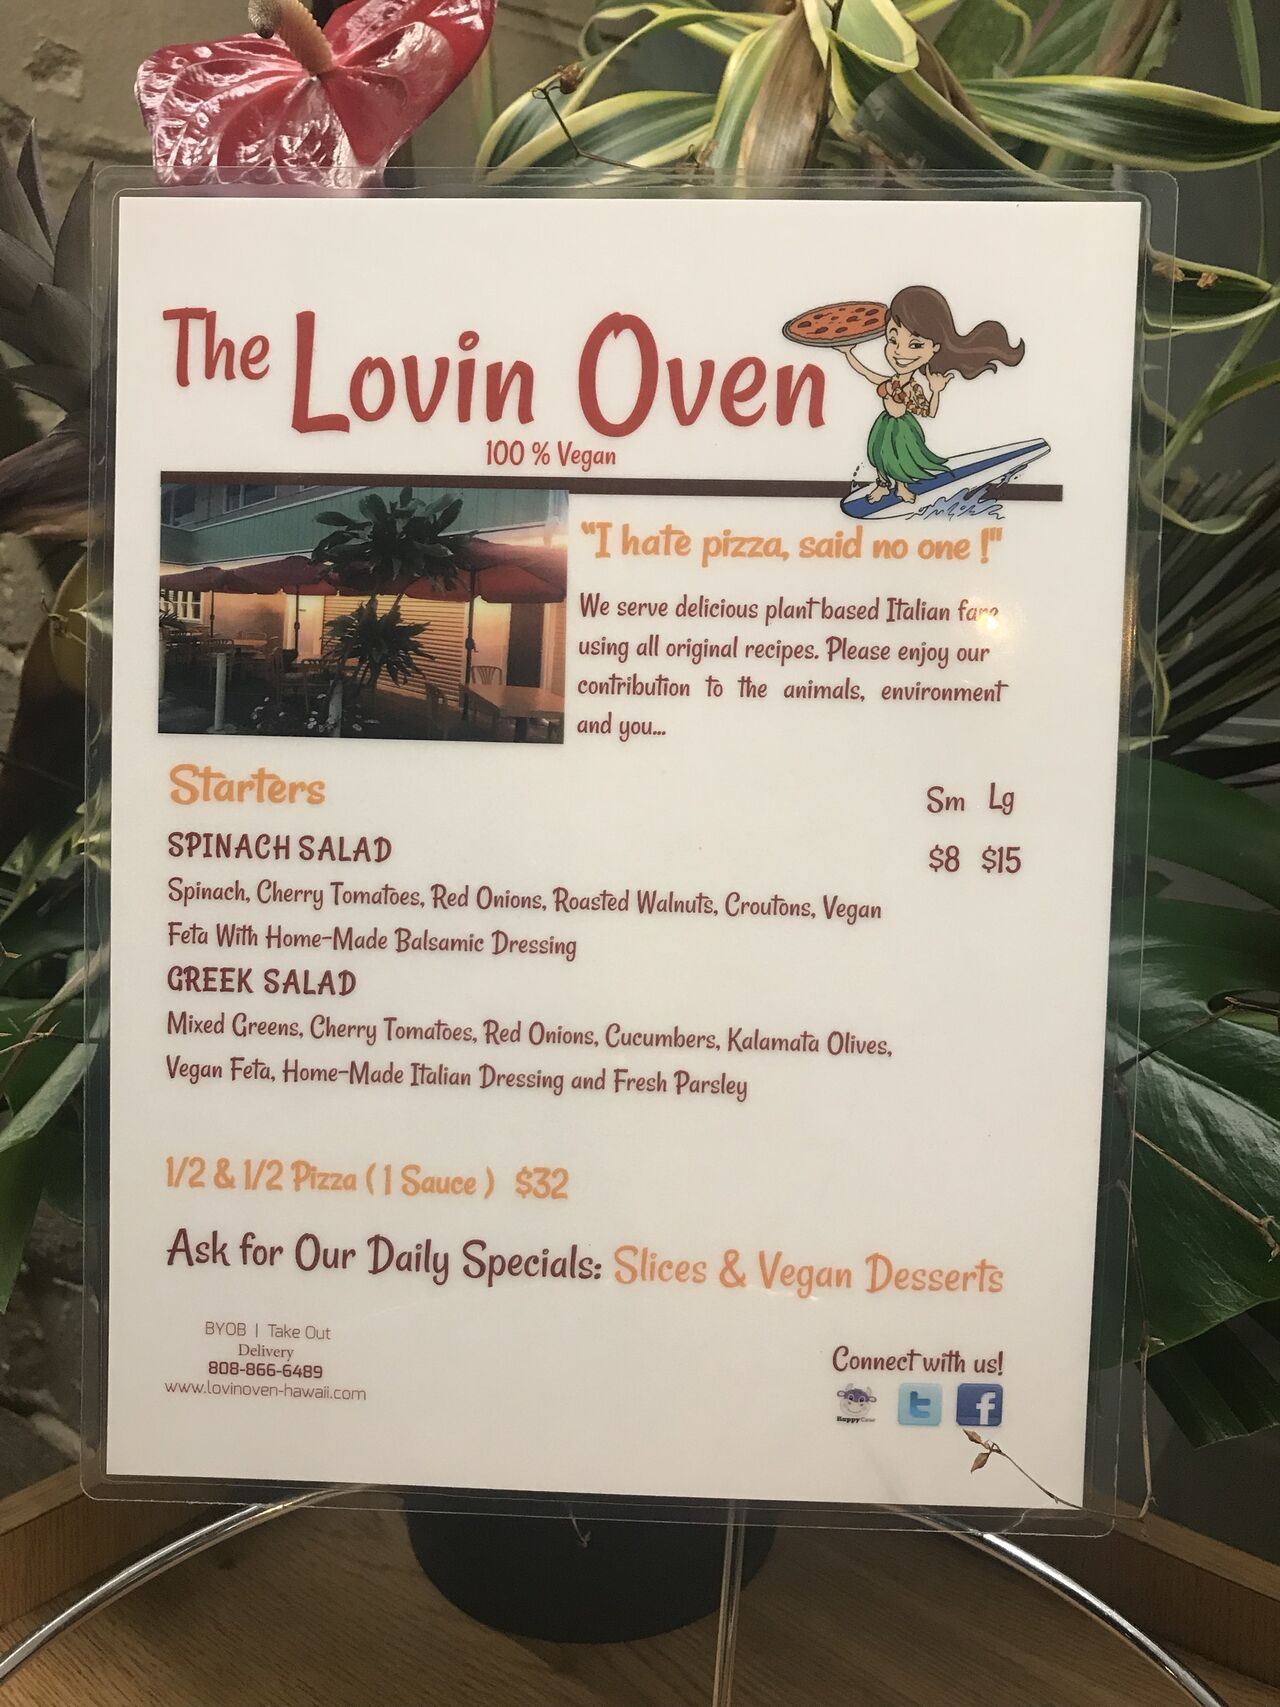 A photo of The Lovin' Oven